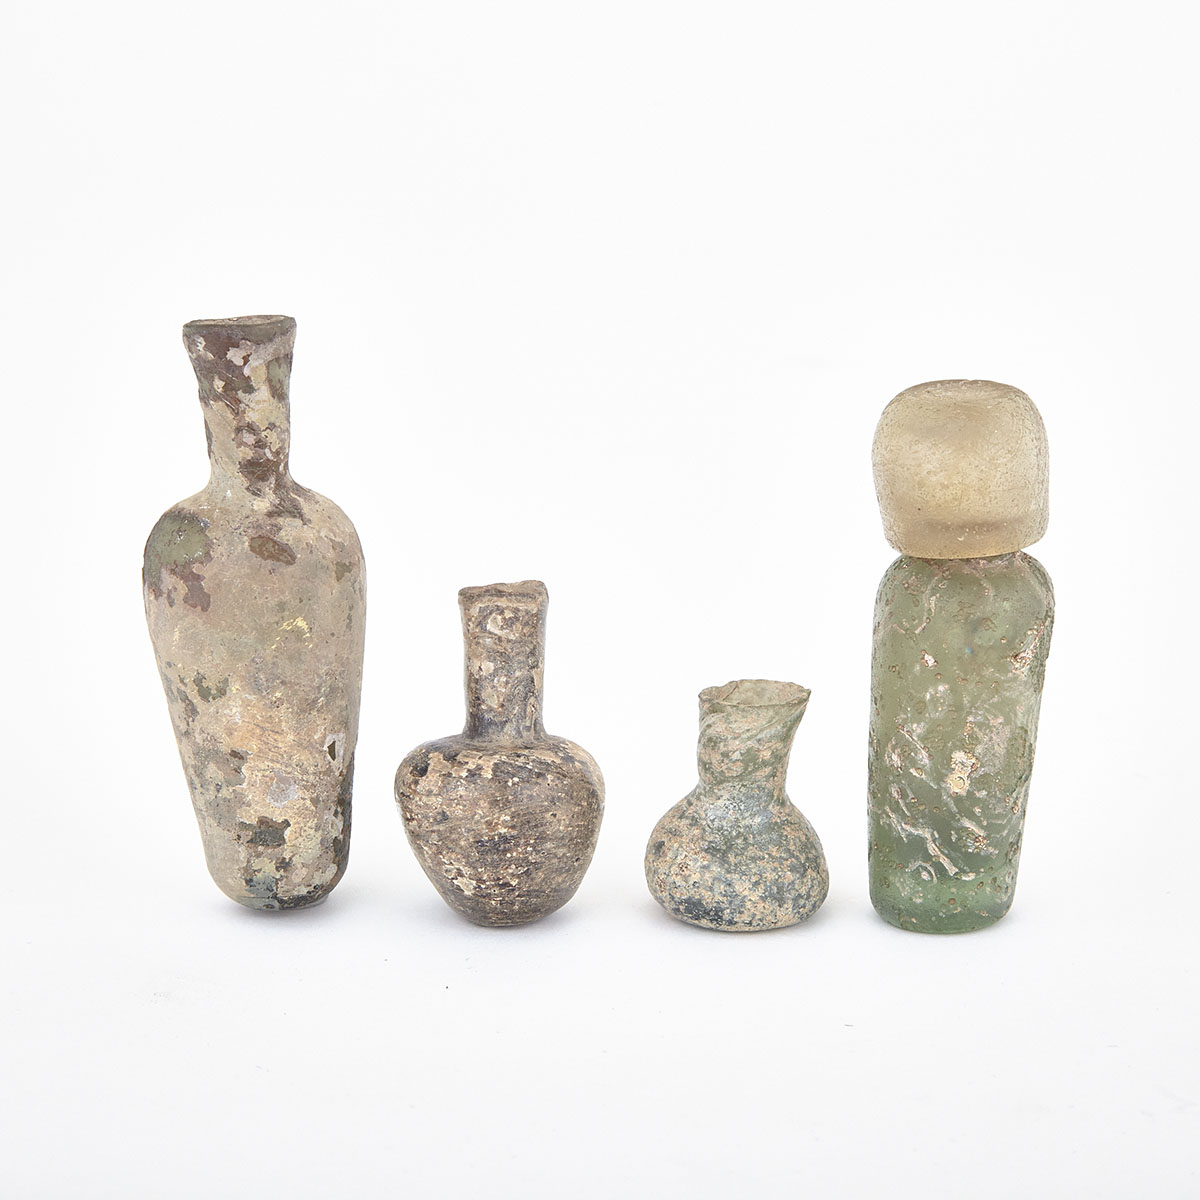 Group of Five Small Roman Glass Vessels, 2nd-3rd century AD